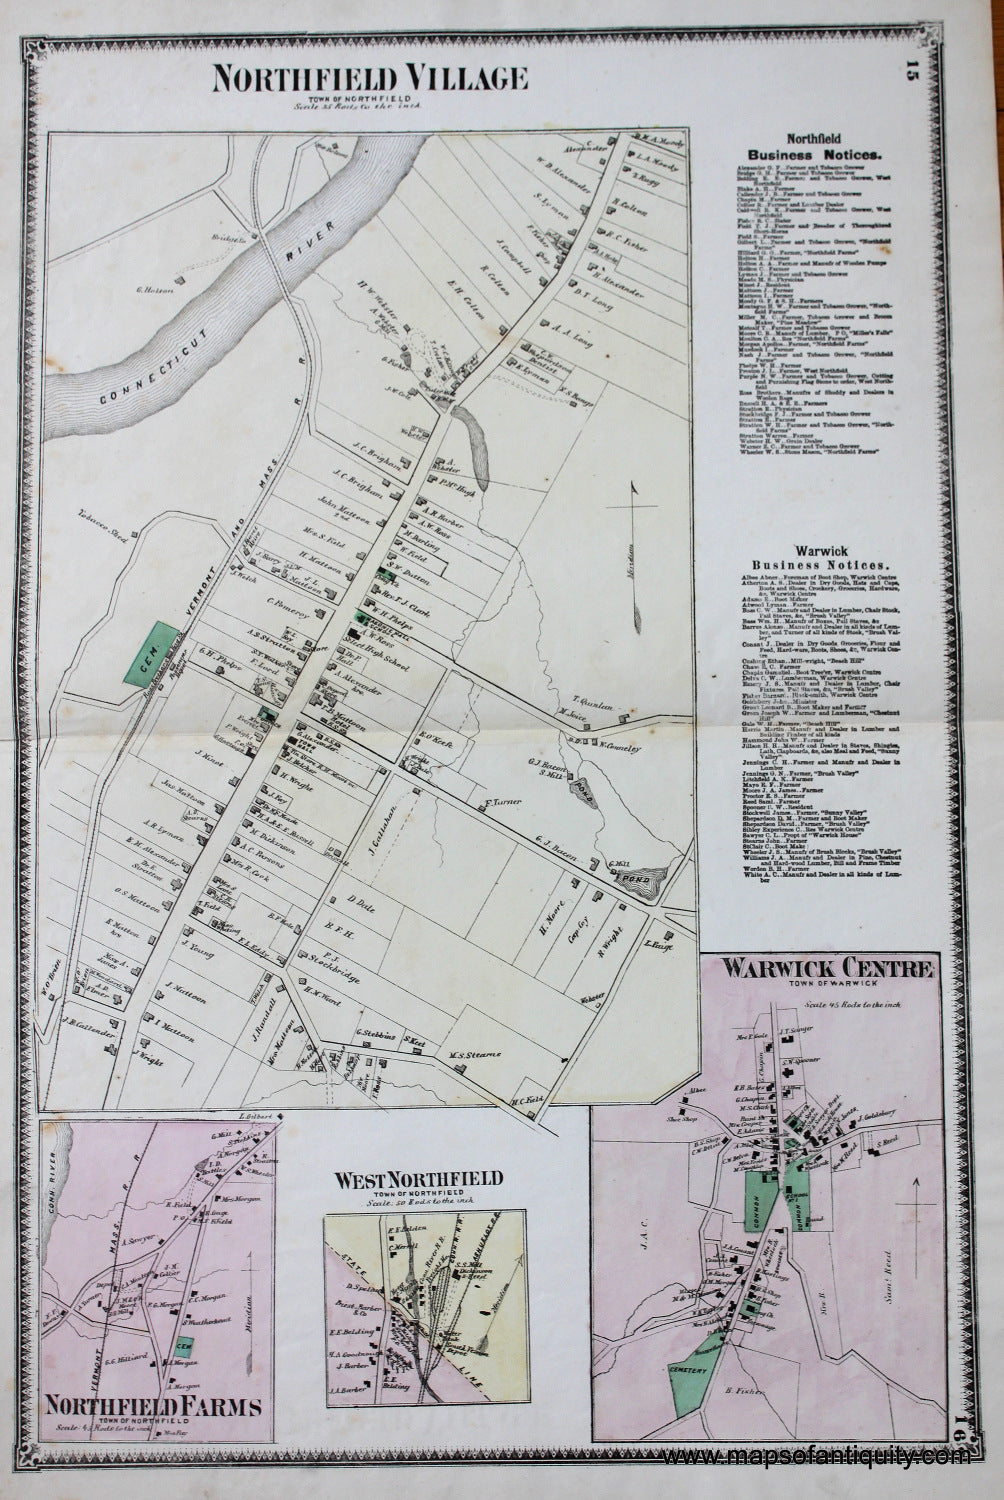 Antique-Hand-Colored-Map-Northfield-Village-Northfield-Farms-Warwick-Centre-pp.-15-16-(MA)-Massachusetts-Franklin-County-1871-Beers-Maps-Of-Antiquity